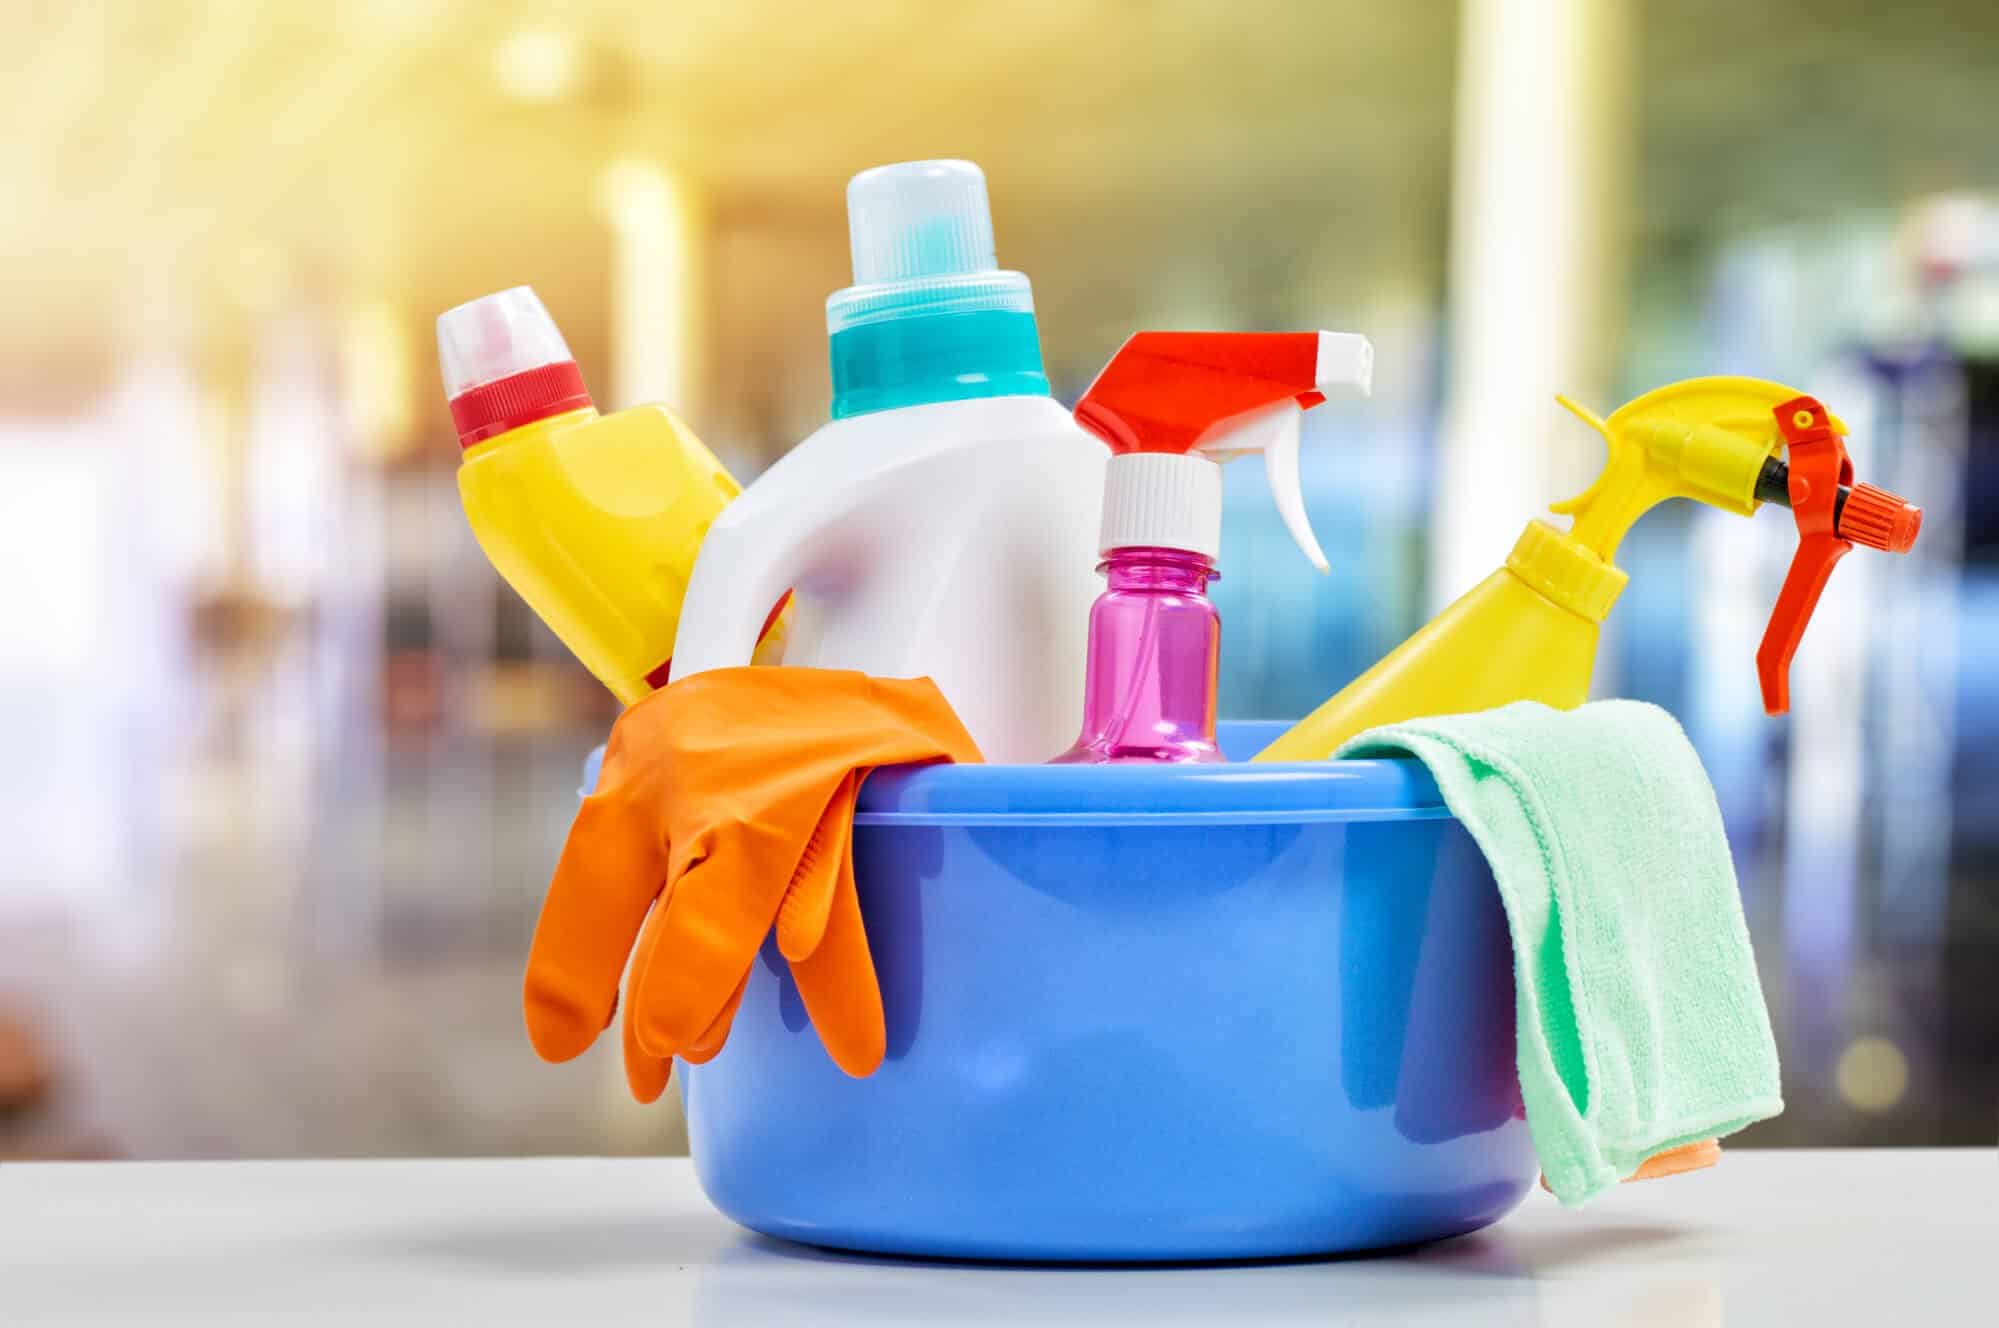 Choosing Cleaning Products That are Right for Your Home